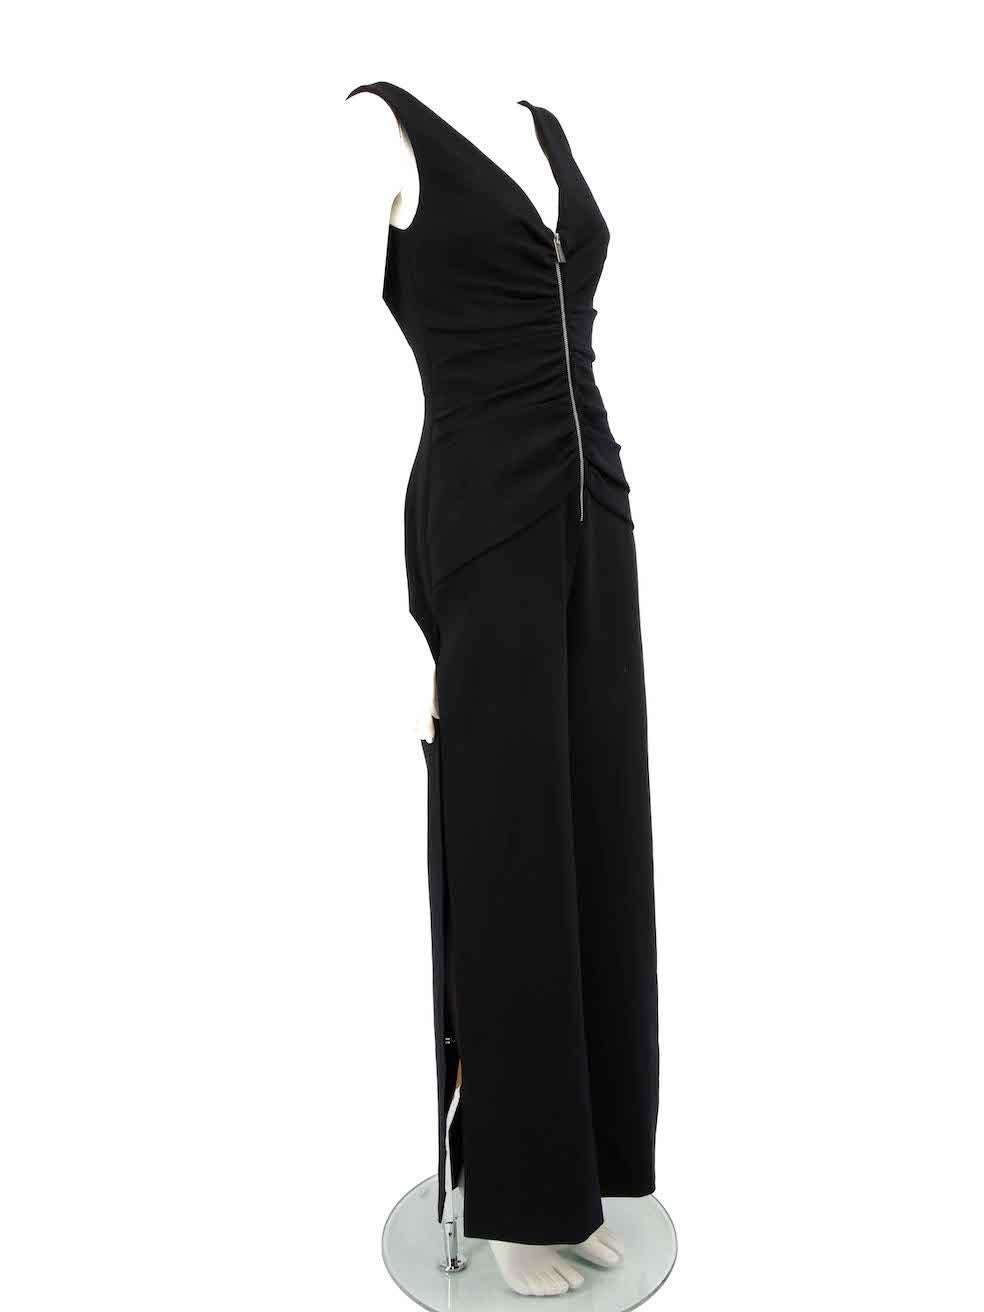 CONDITION is Very good. Minimal wear to jumpsuit is evident. Minimal wear to front zip pleats with scratches to fabric on this used Honayda designer resale item.
 
 
 
 Details
 
 
 Black
 
 Synthetic
 
 Jumpsuit
 
 Sleeveless
 
 V-neck
 
 Pleated